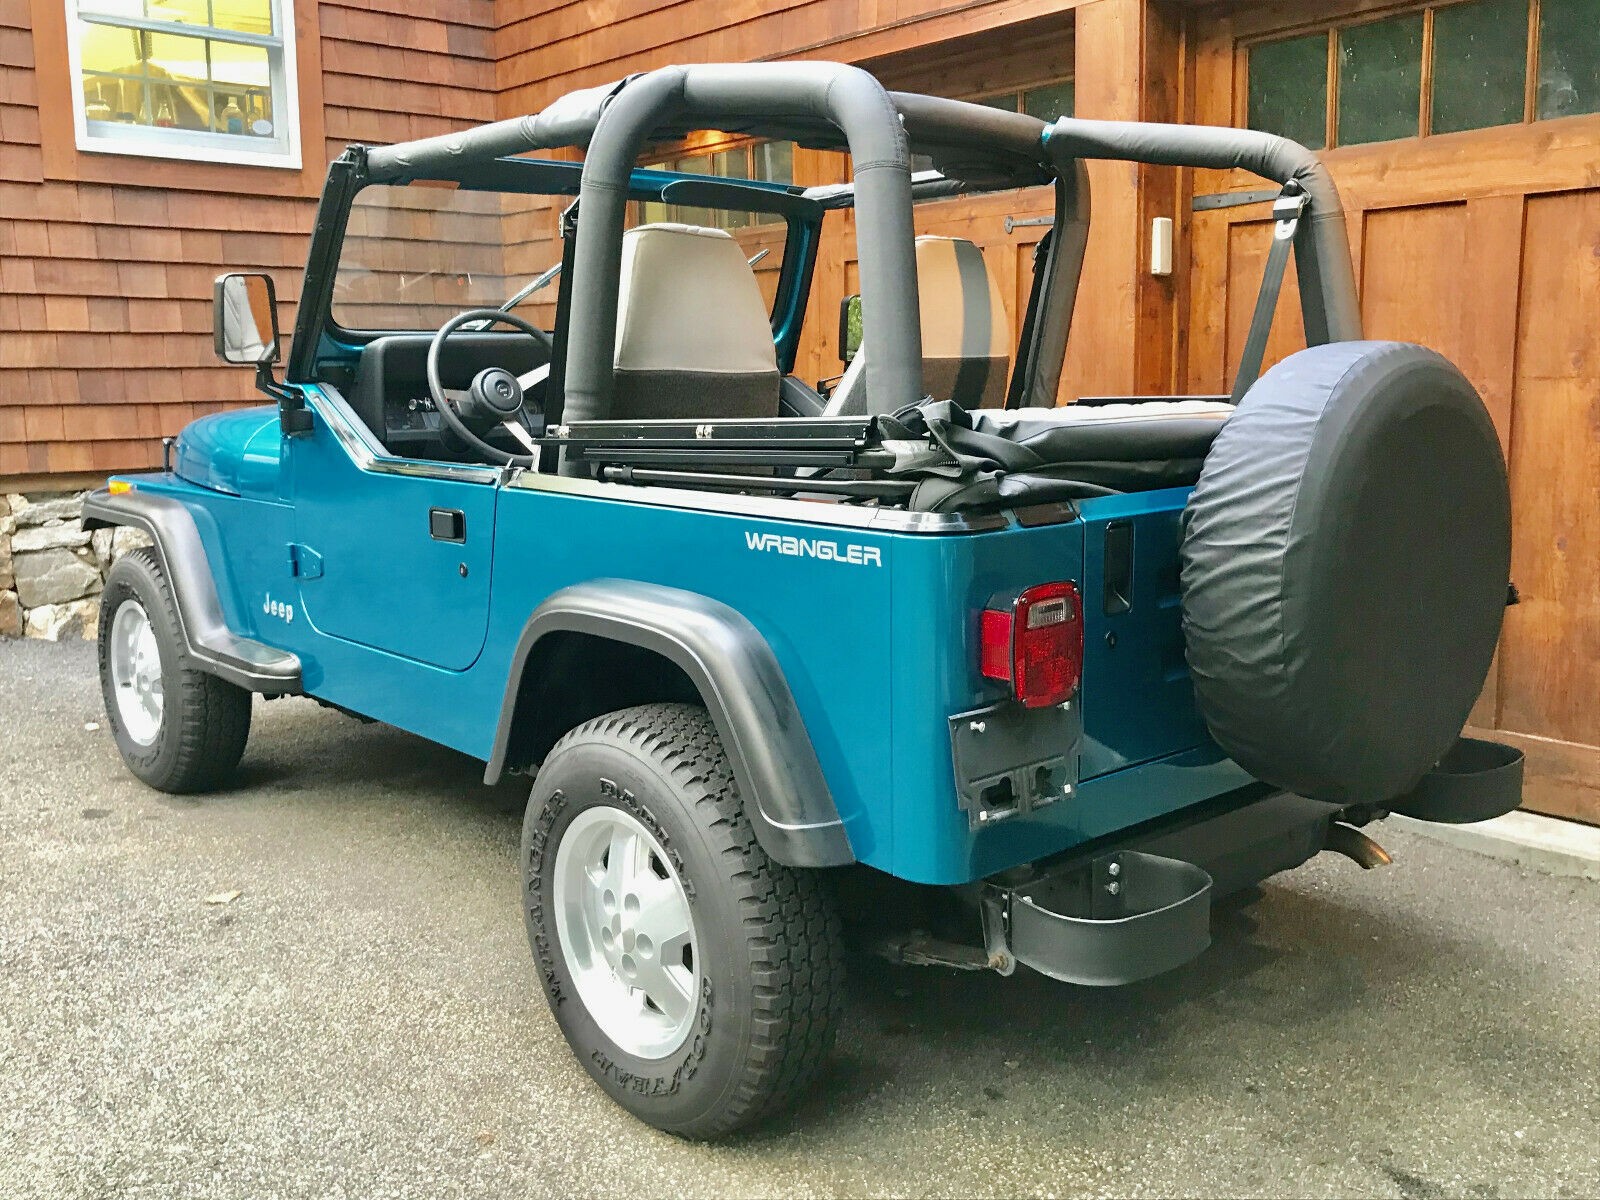 Turn Back Time With This Low-Mileage, $32k Jeep Wrangler YJ From 1993 |  Carscoops